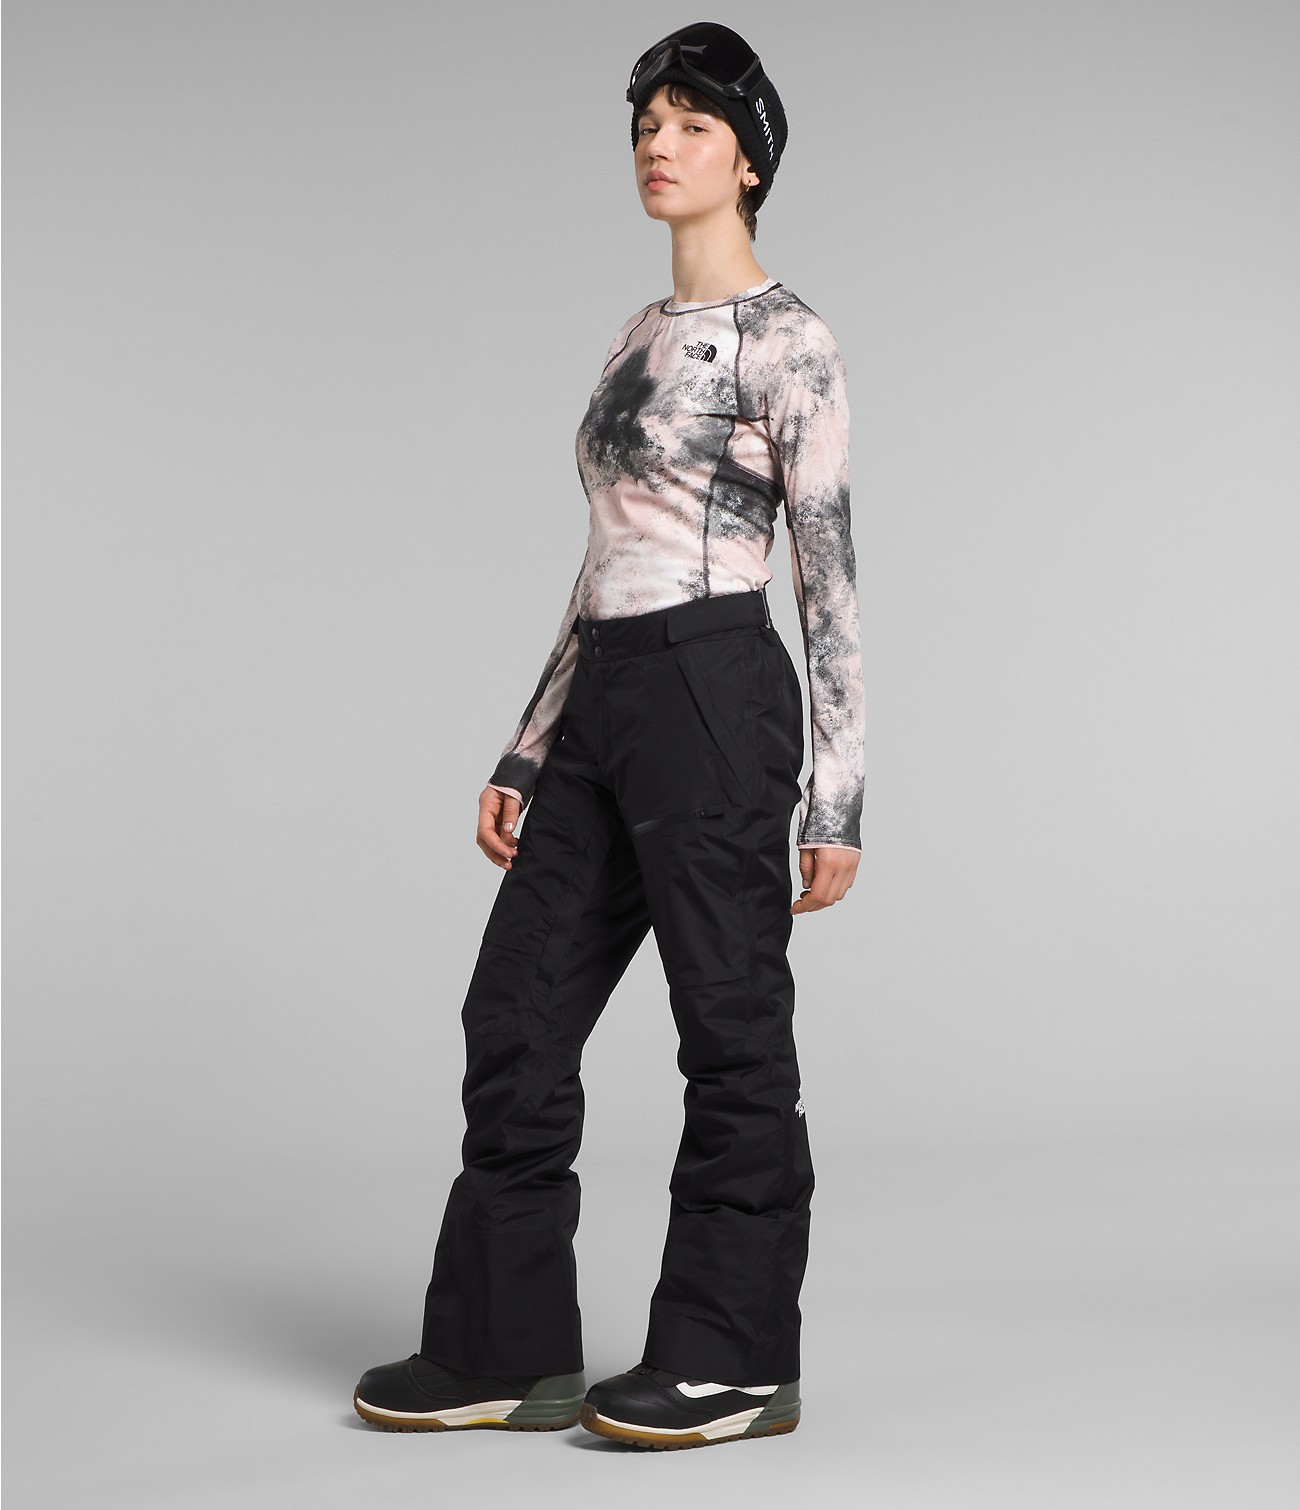 Women’s Dawnstrike GORE-TEX® Insulated Pants | The North Face